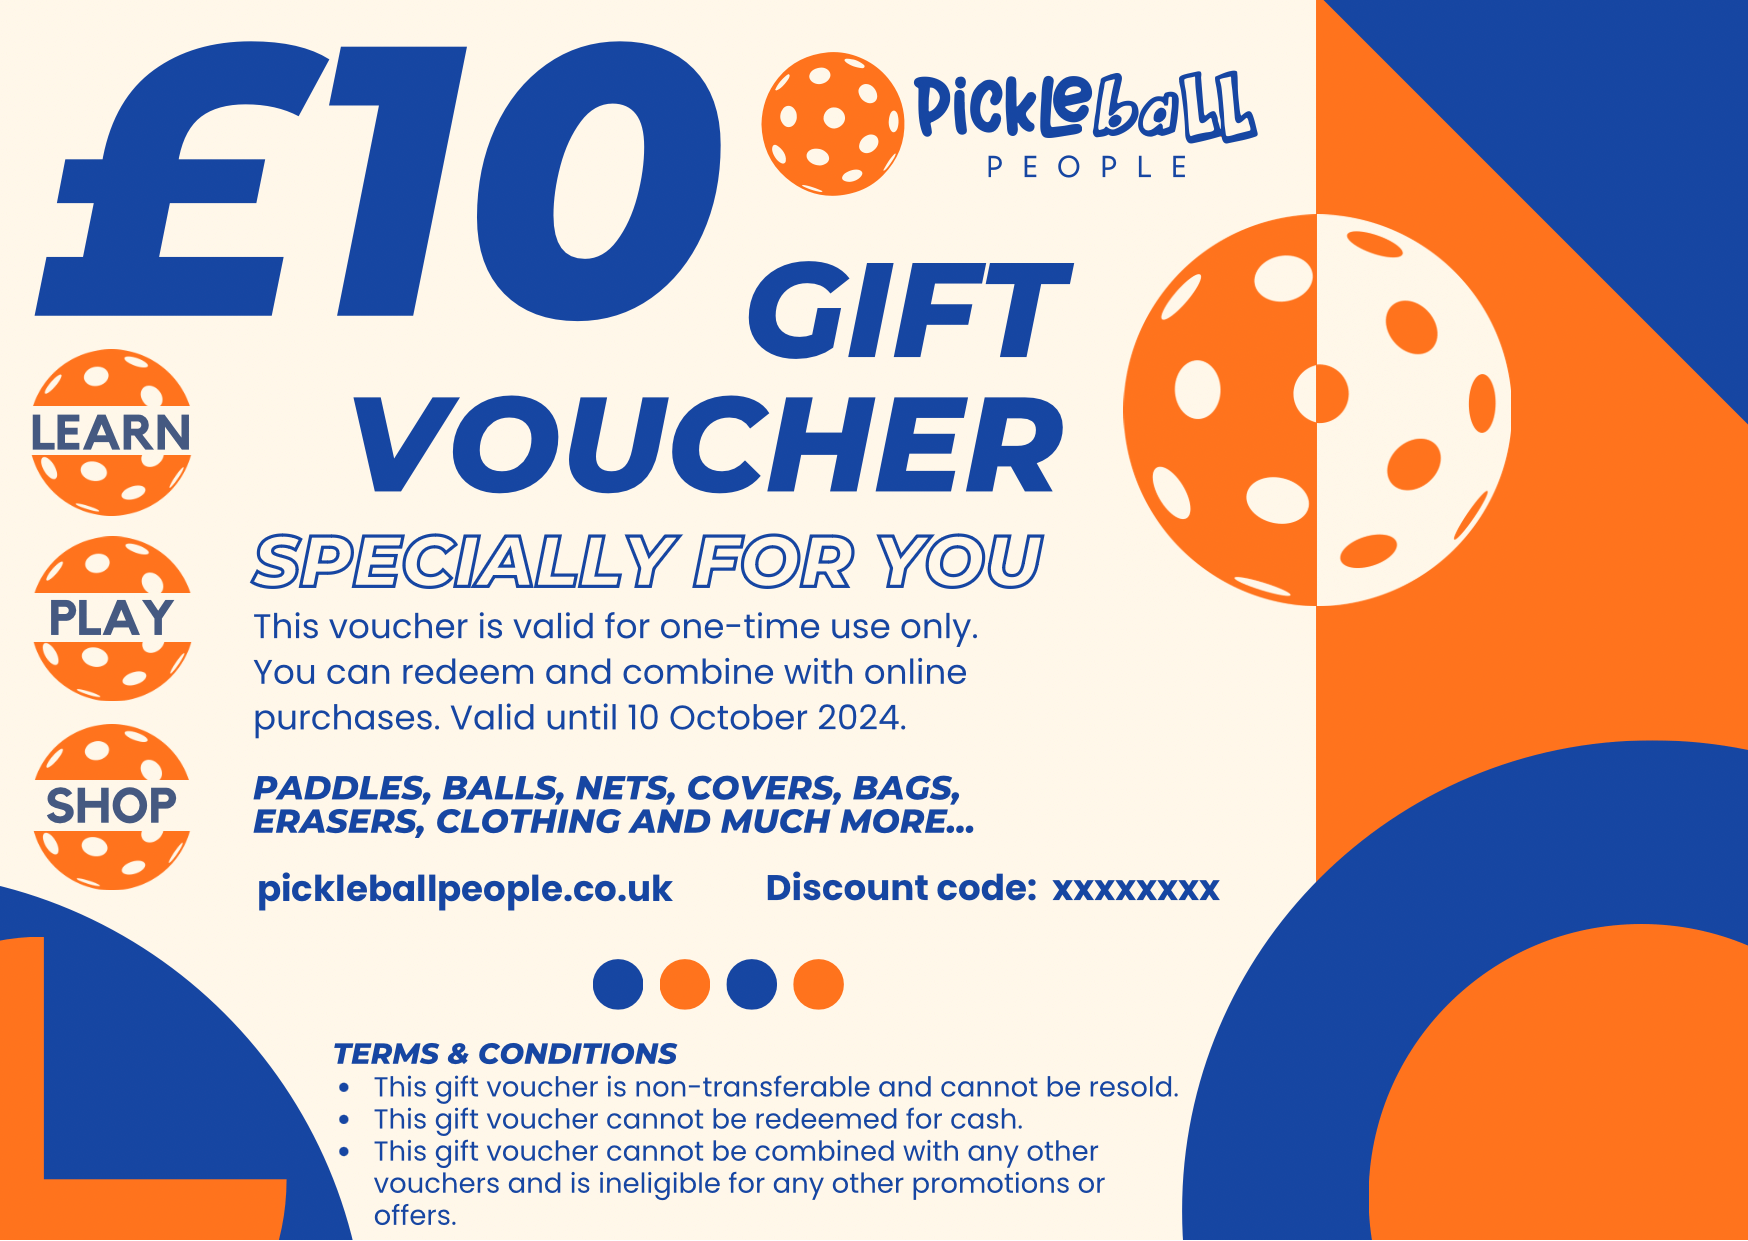 Featured image for “Pickleball People £10 - Gift Voucher”